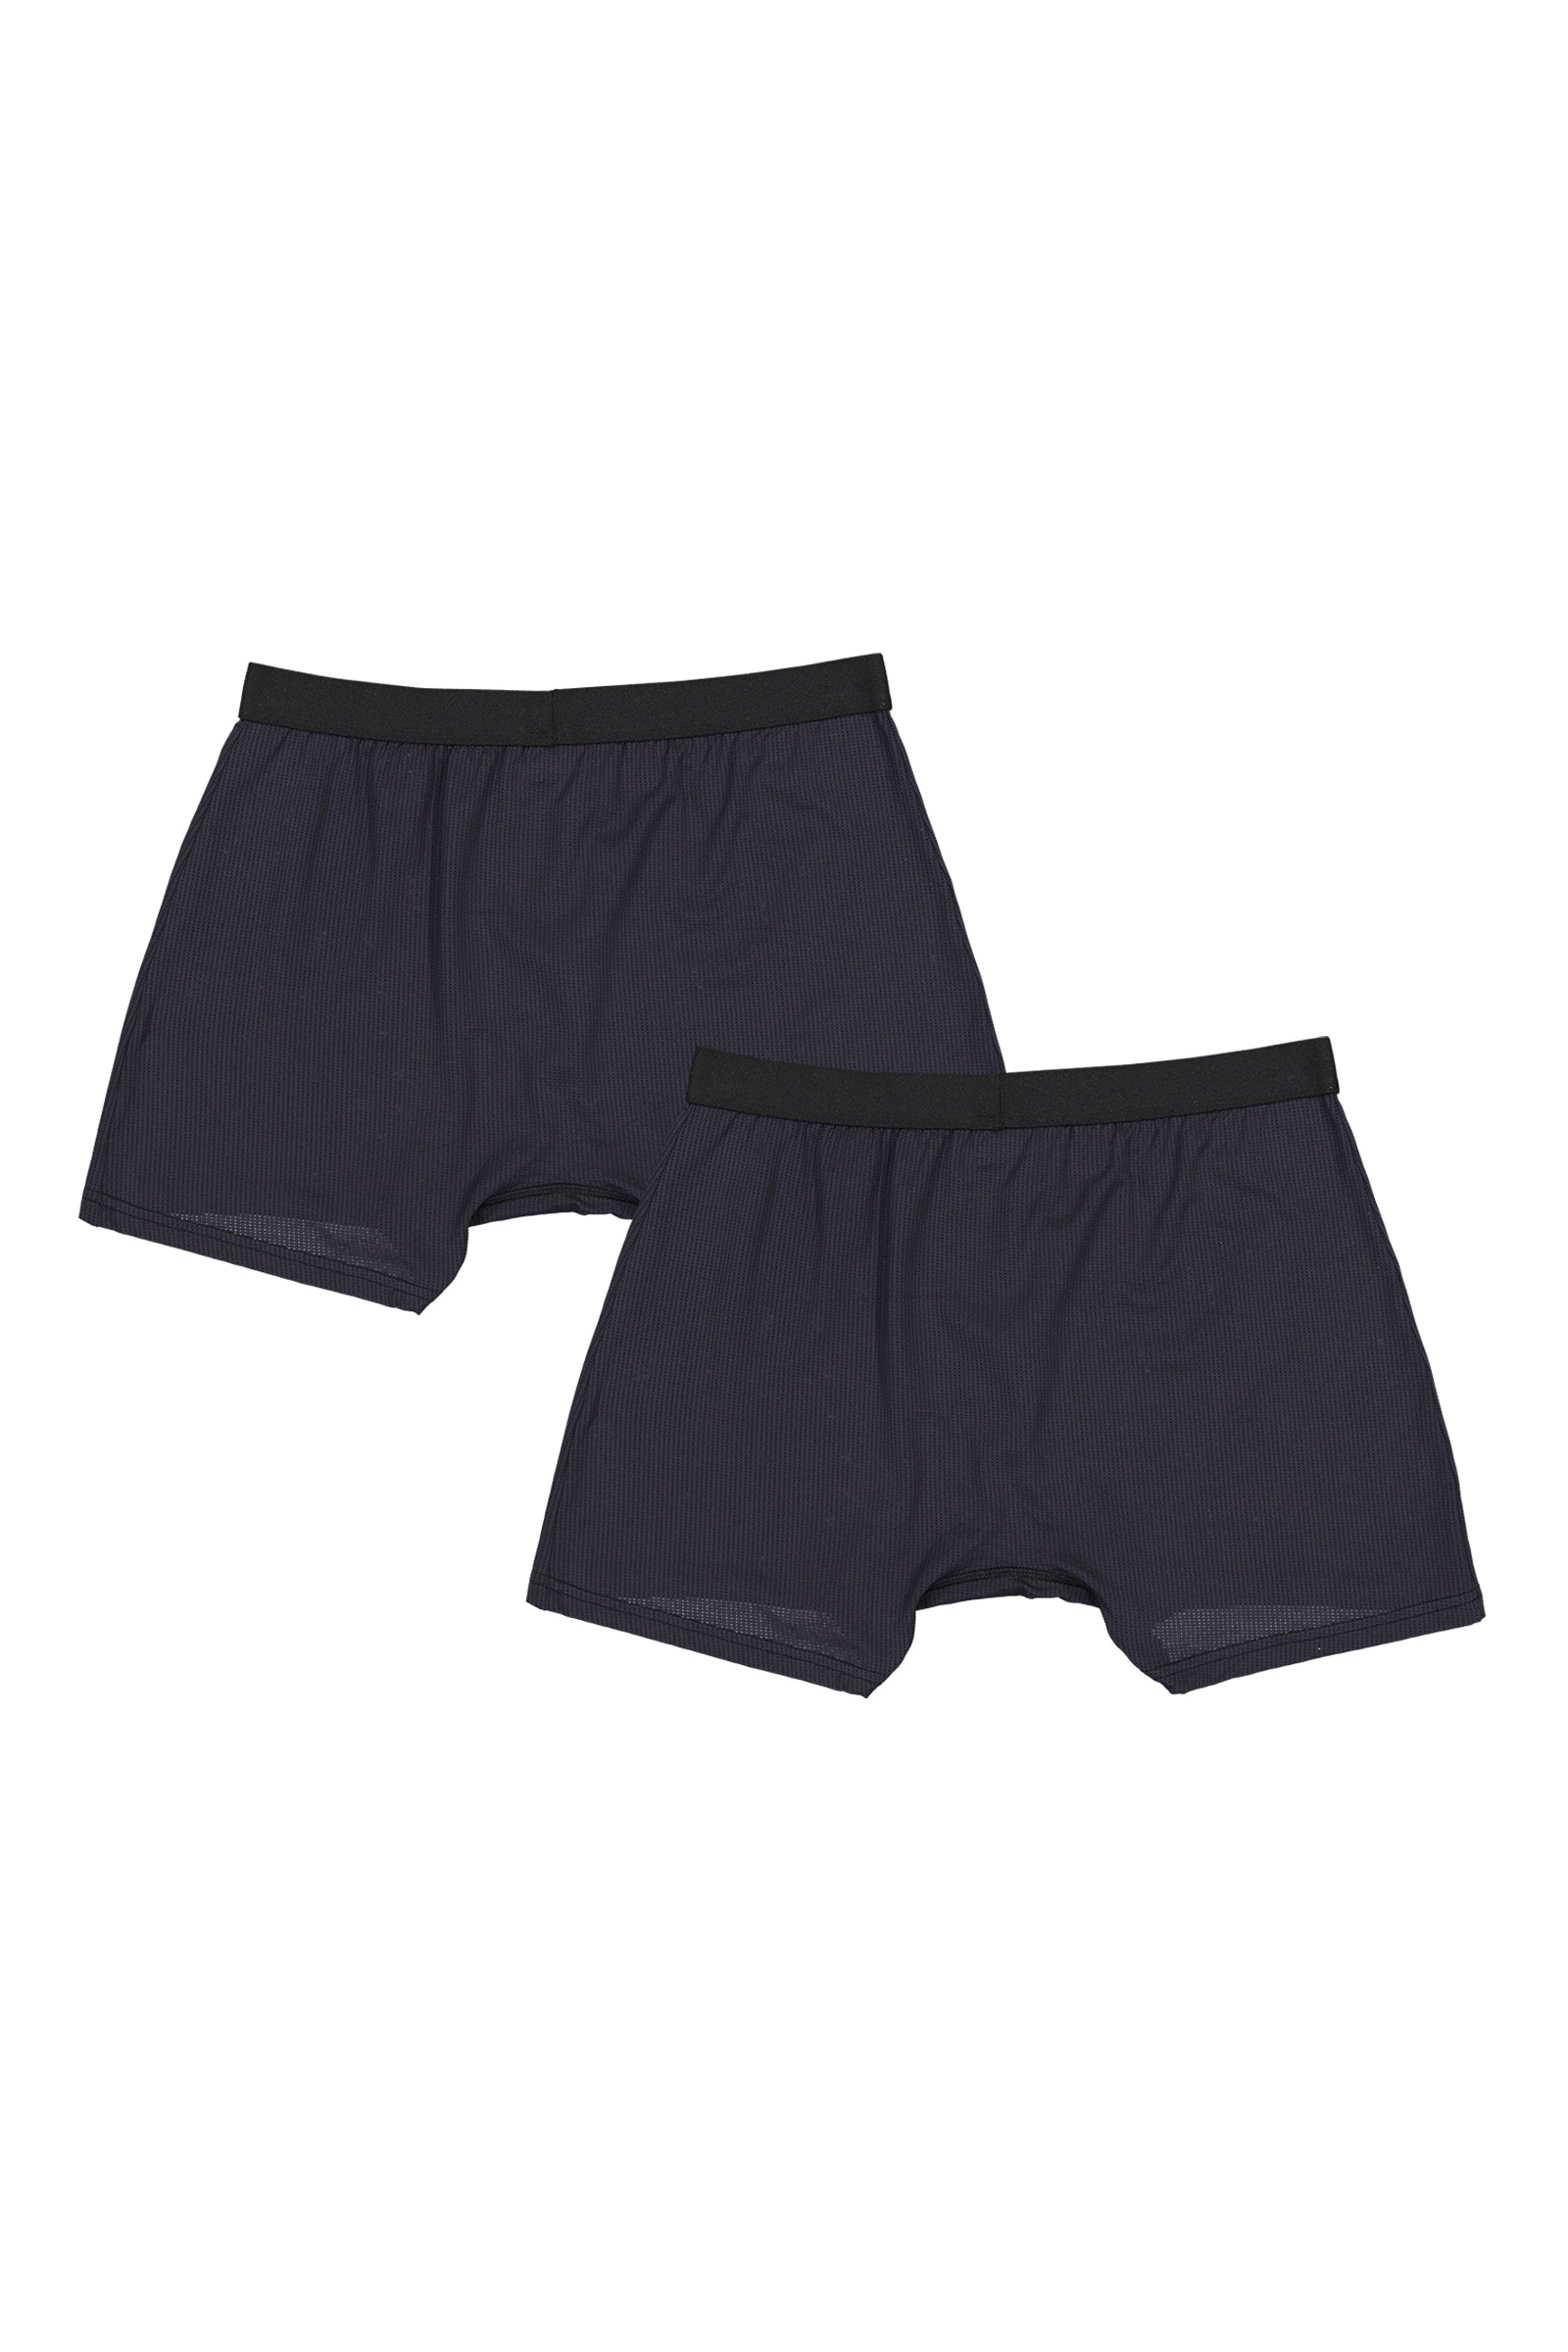 MESH FOUNDATION BOXER BRIEF 2-PACK